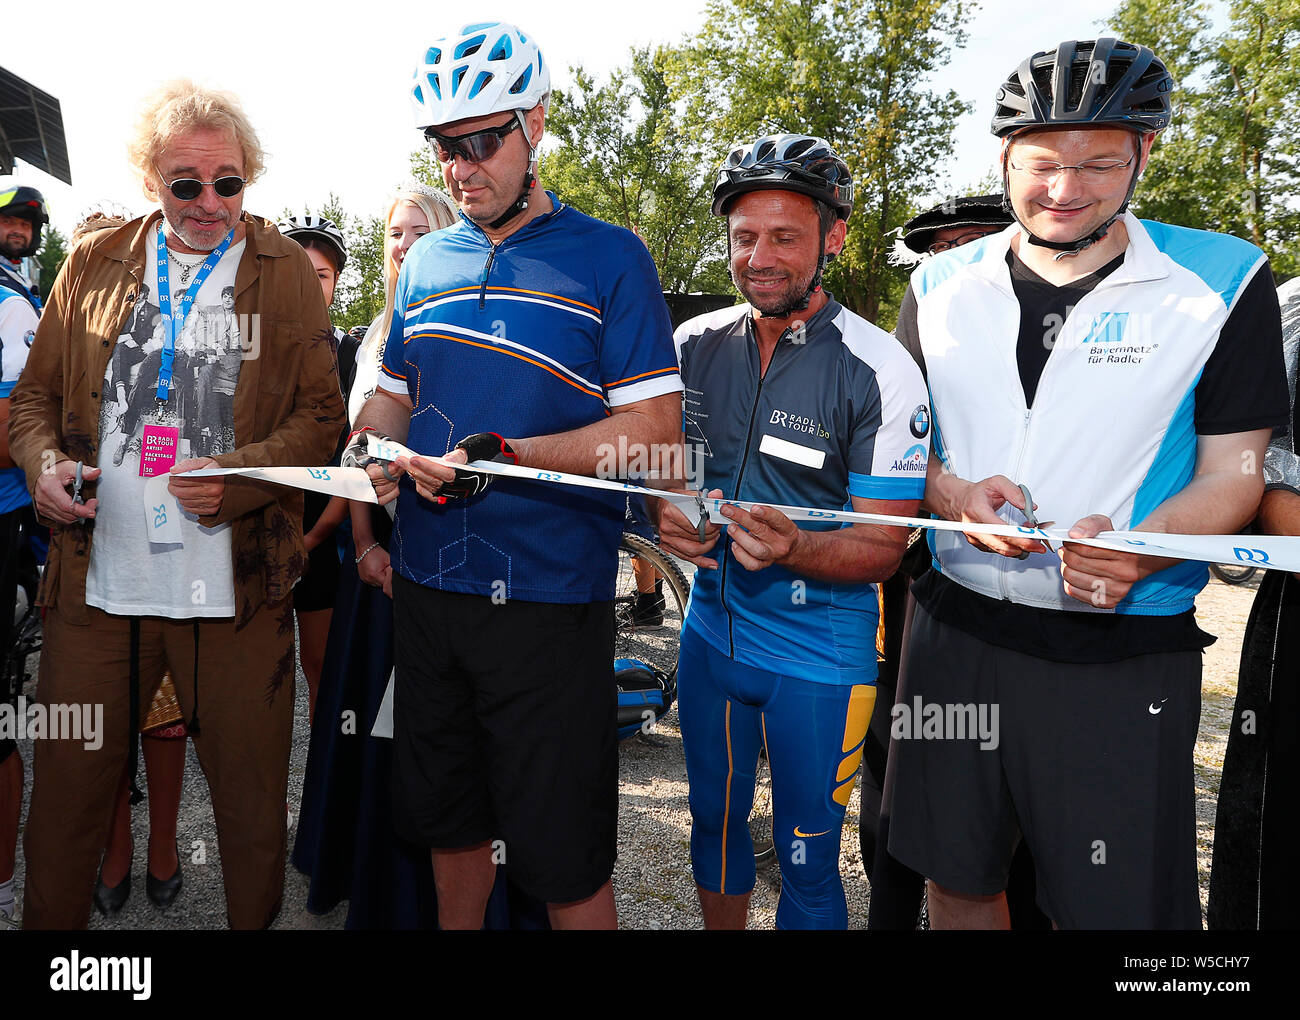 Bad Staffelstein, Germany. 28th July, 2019. Entertainer Thomas Gottschalk (l-r), Markus Söder (CSU), Minister President of the Free State of Bavaria, Thorsten Glauber (Free Voters), State Minister for the Environment and Consumer Protection, and Hans Reichhart (CSU), State Minister for Housing, Construction and Transport, cut a ribbon at the opening of the 30th BR-Radltour. Credit: Peter Kolb/dpa/Alamy Live News Stock Photo